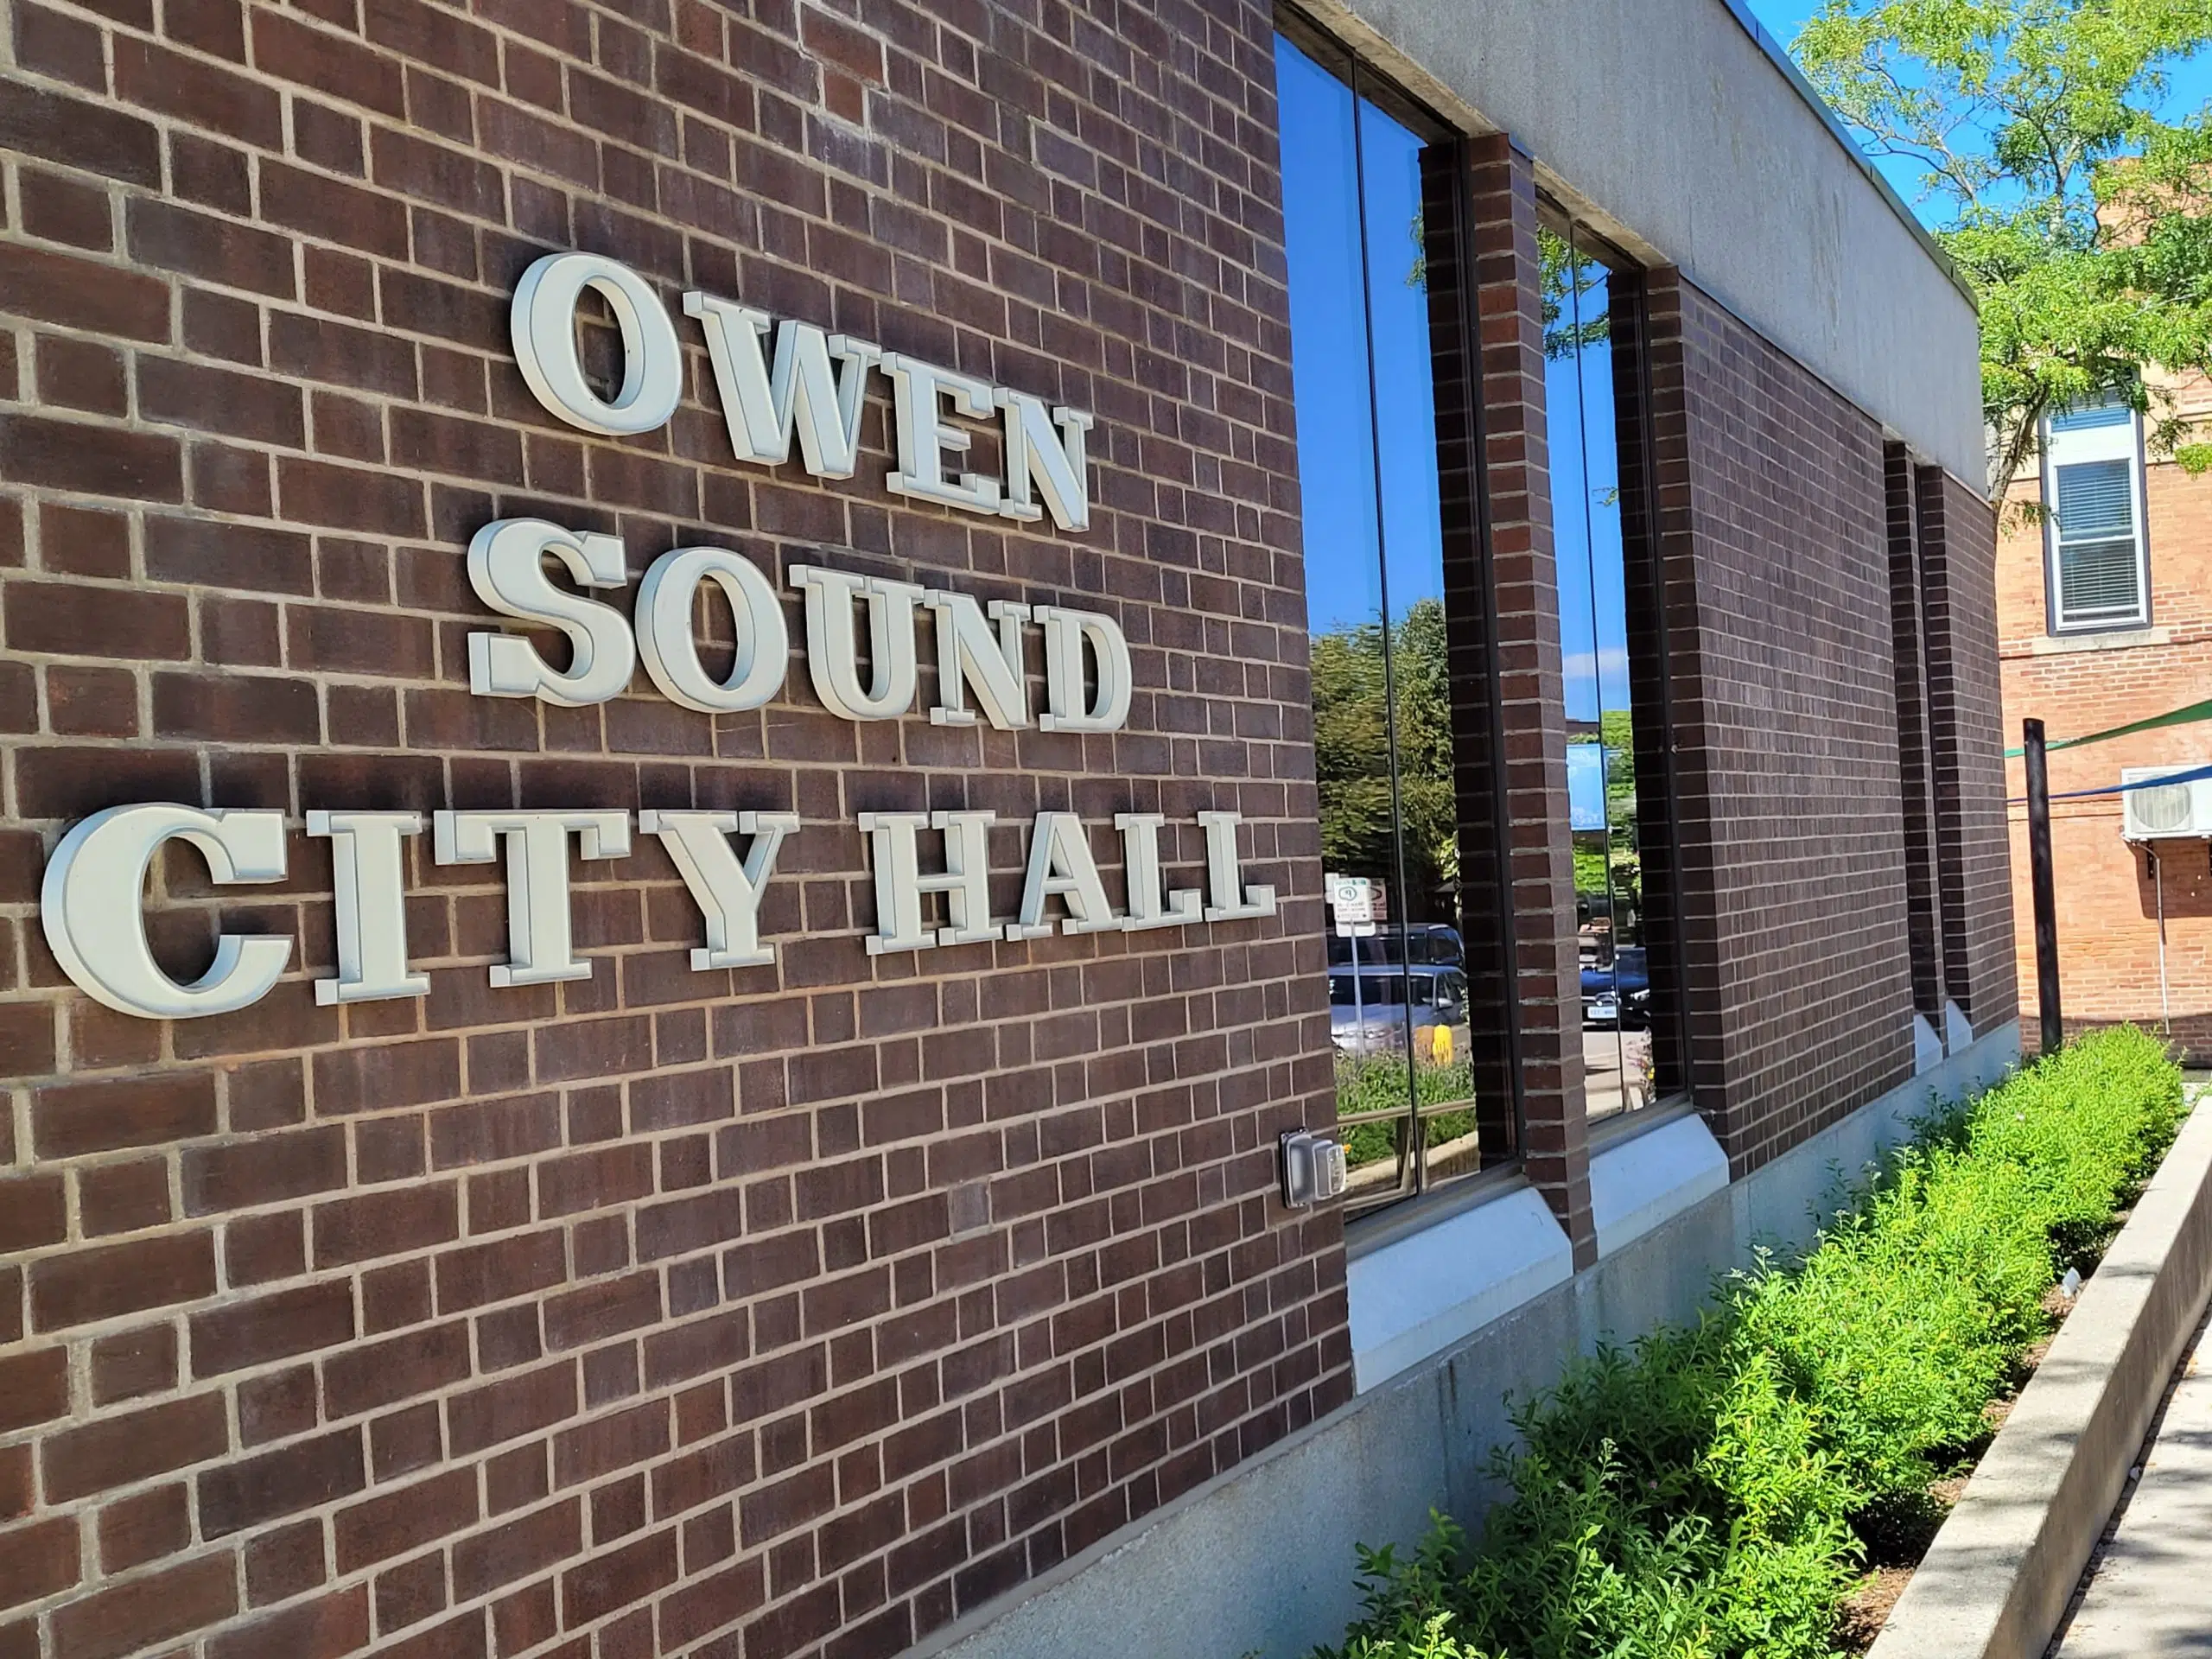 Owen Sound Council Delays Consideration Of Motion Calling For Ban On Some Short-Term Rentals